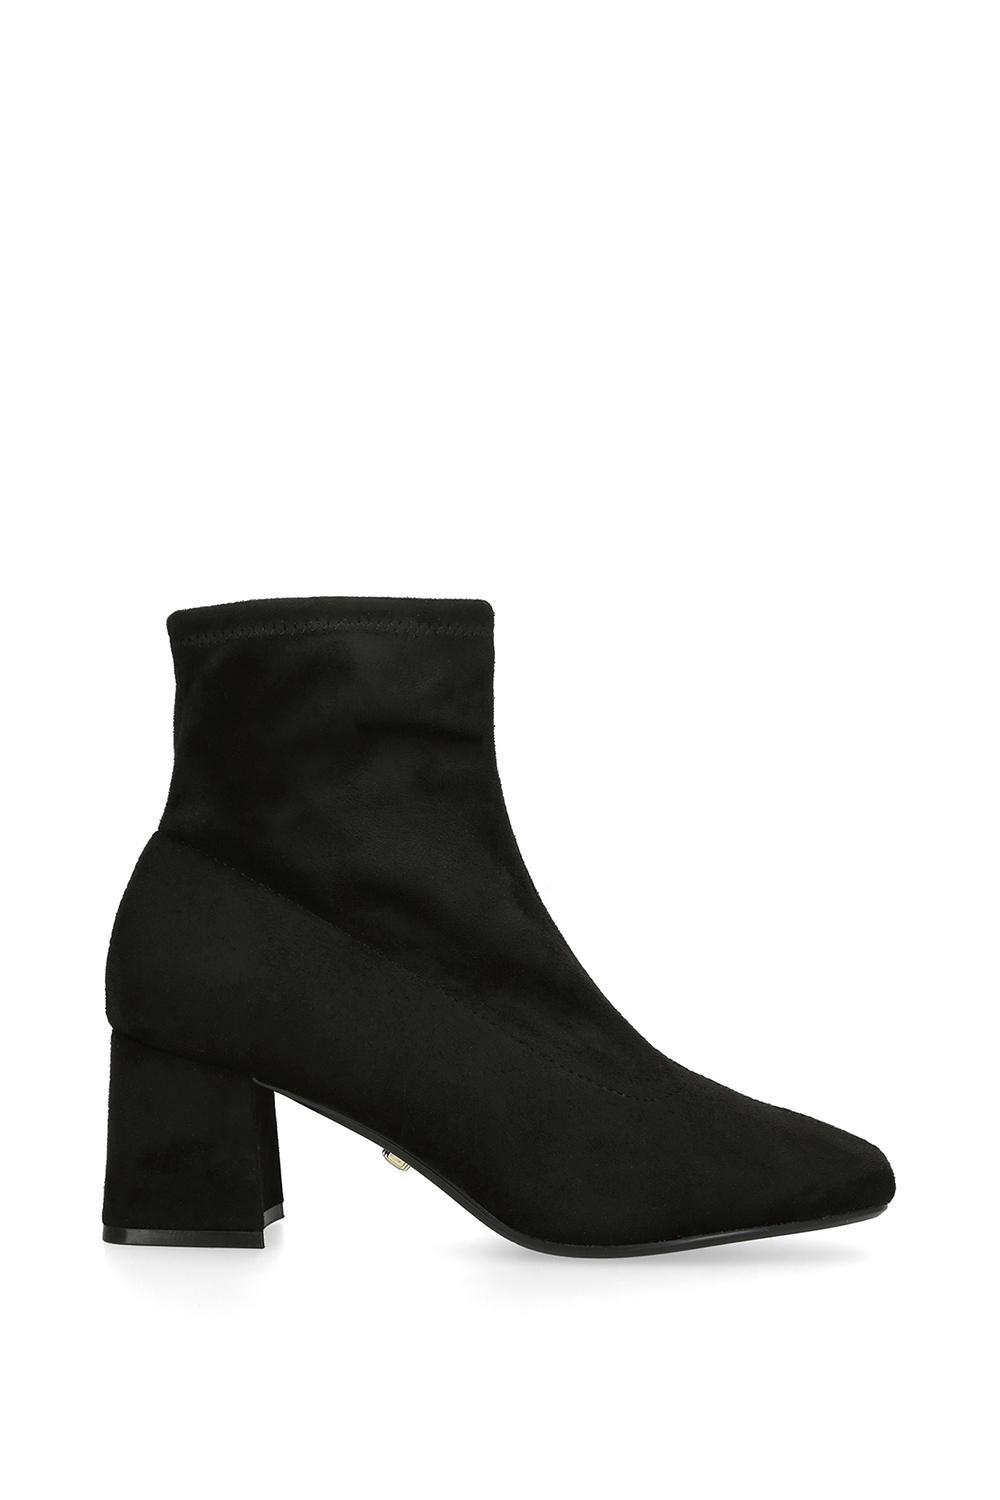 'quant ankle boot 2' fabric boots